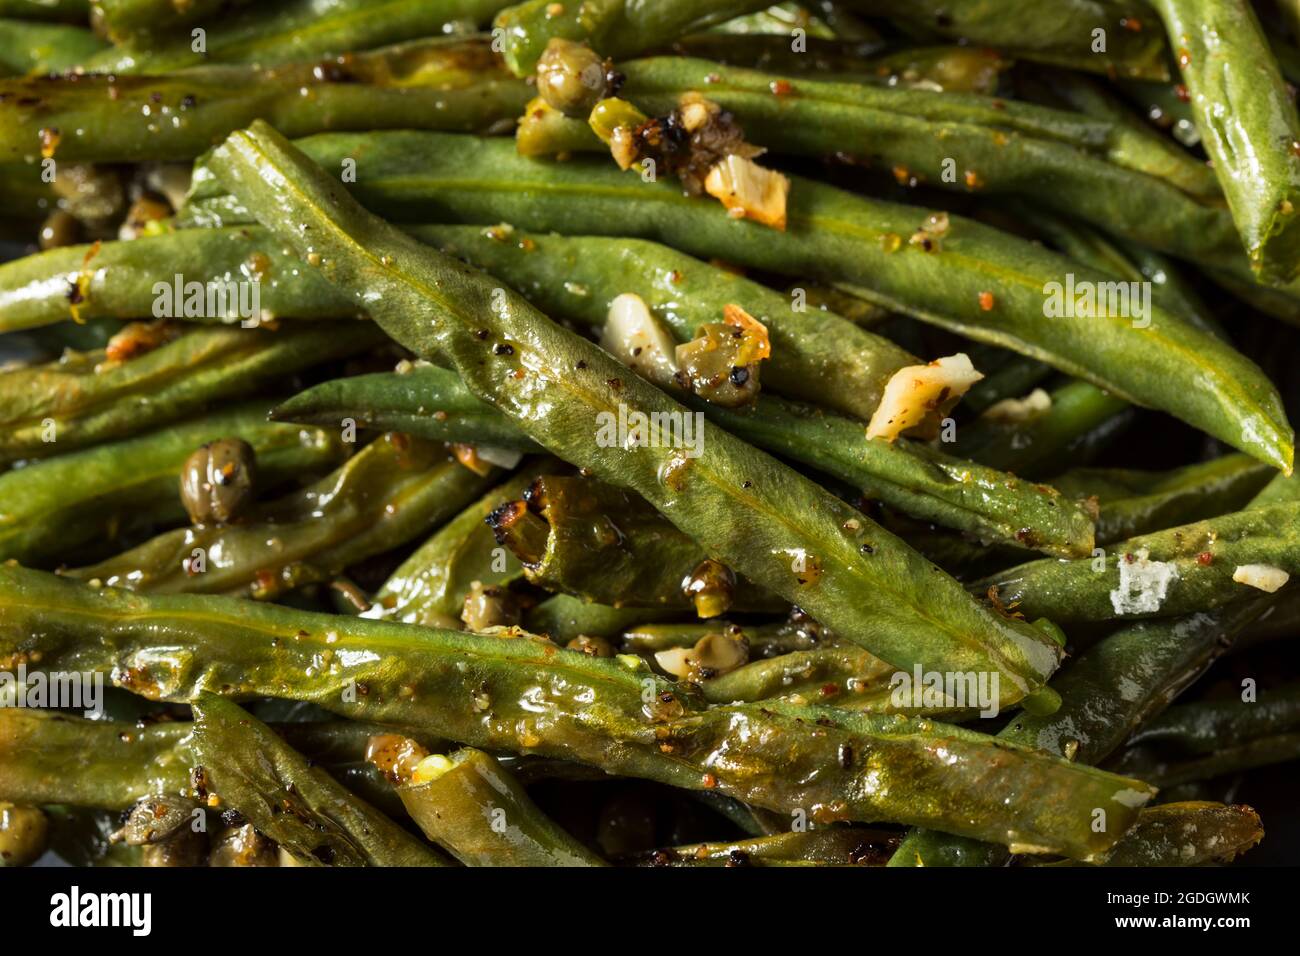 Healthy Homemade Roasted Green Beans with Garlic and Capers Stock Photo